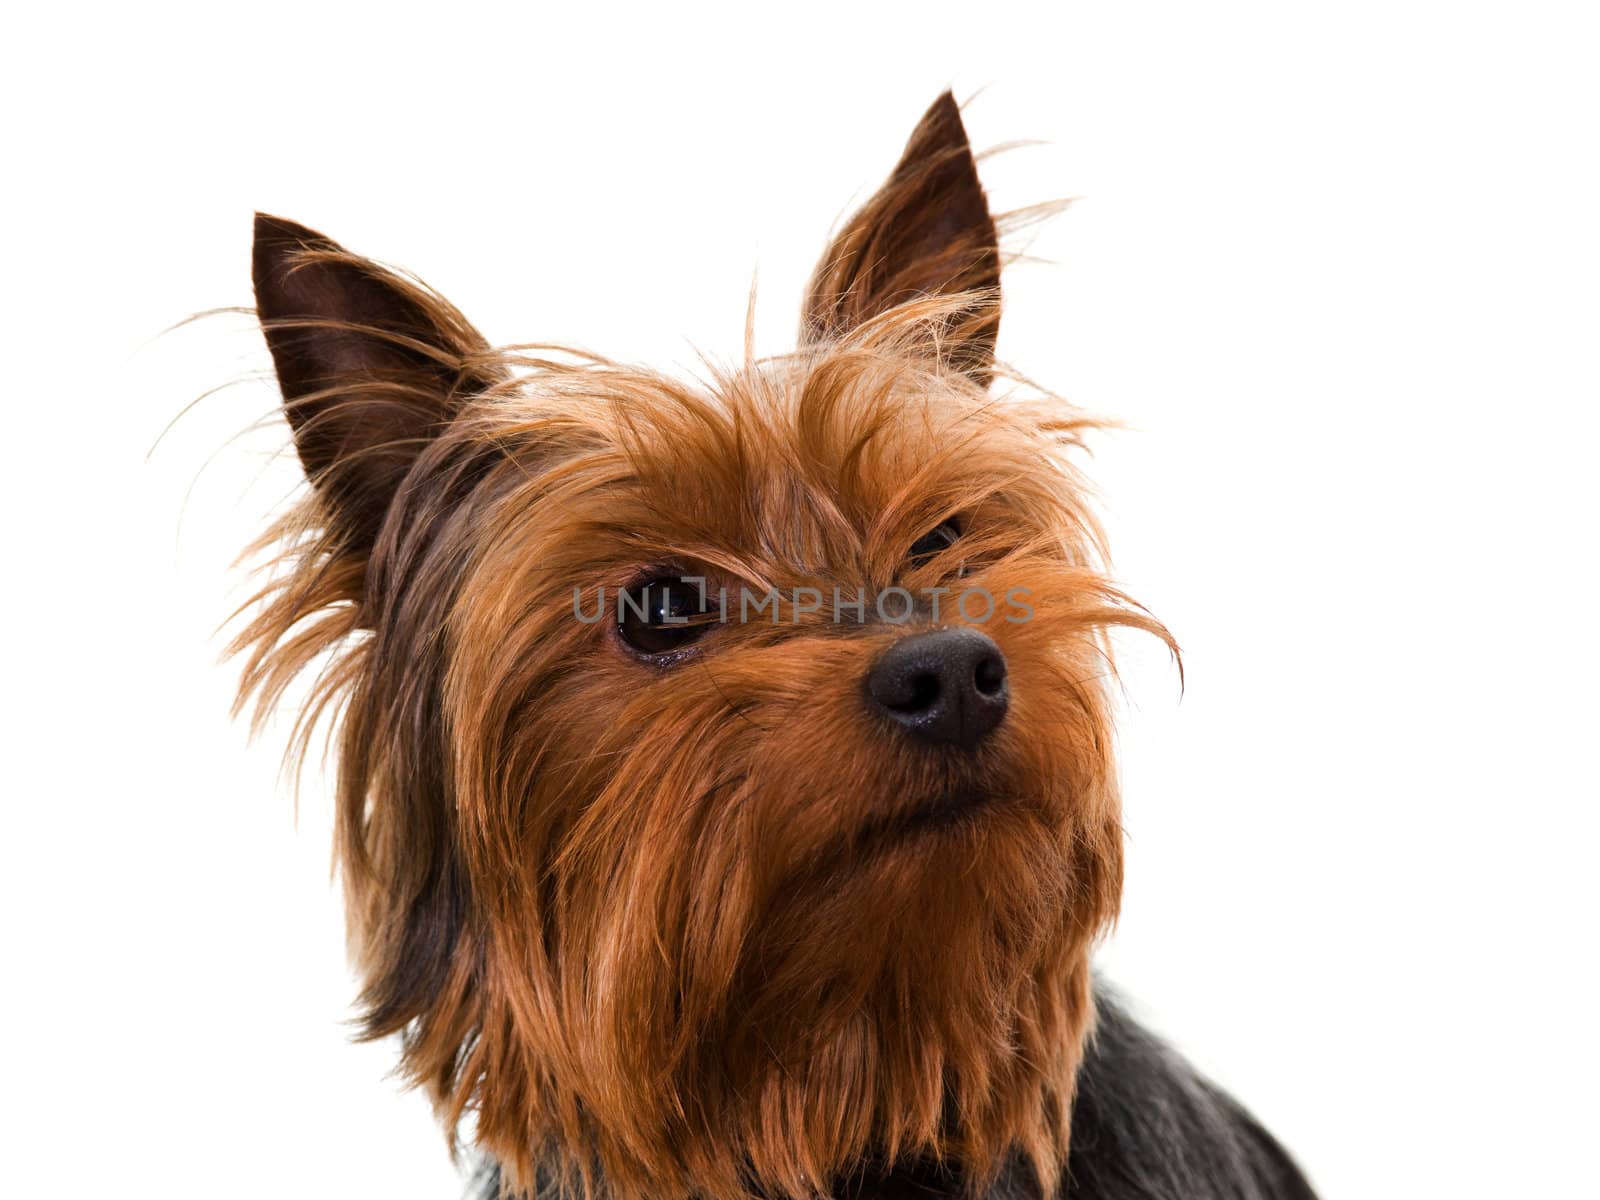 Studio photo of a yorkshire terrier isolated on white